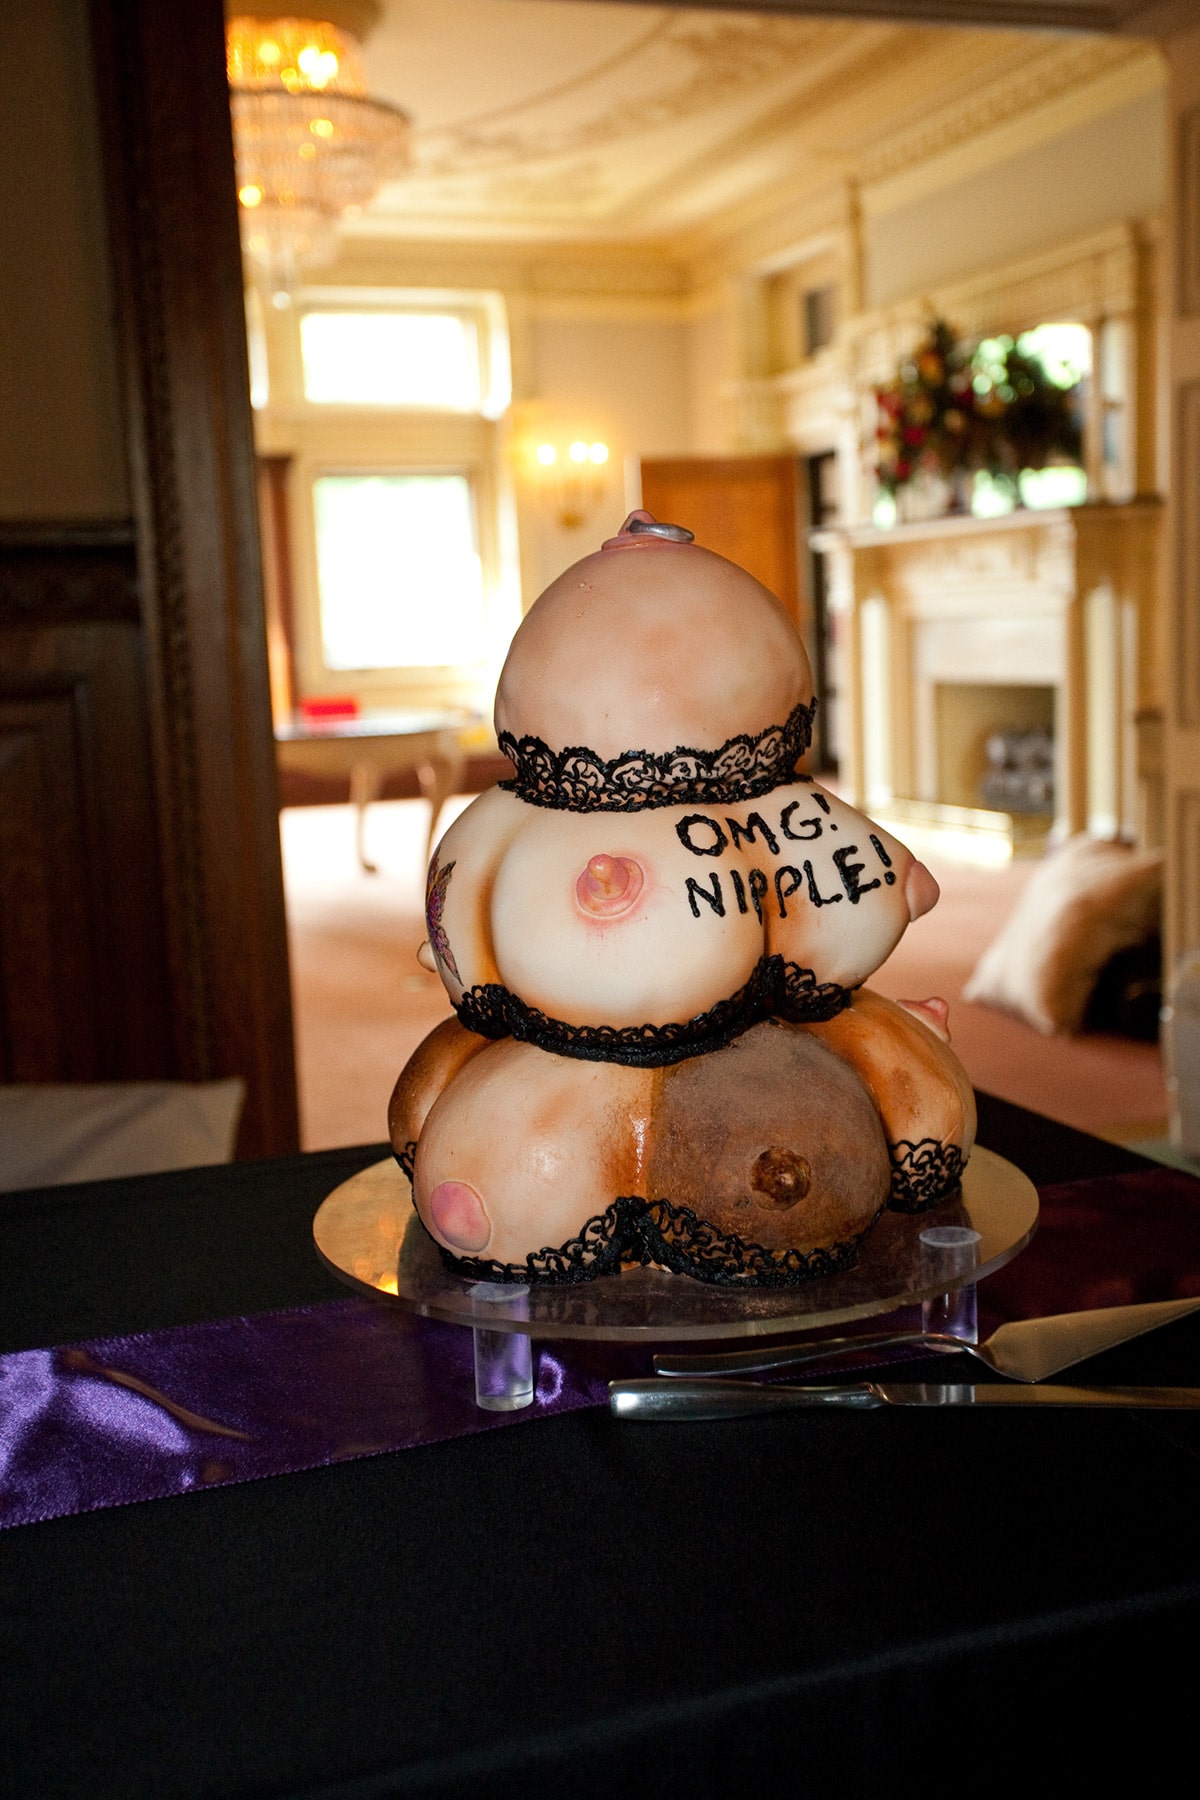 The pile of boobs cake.